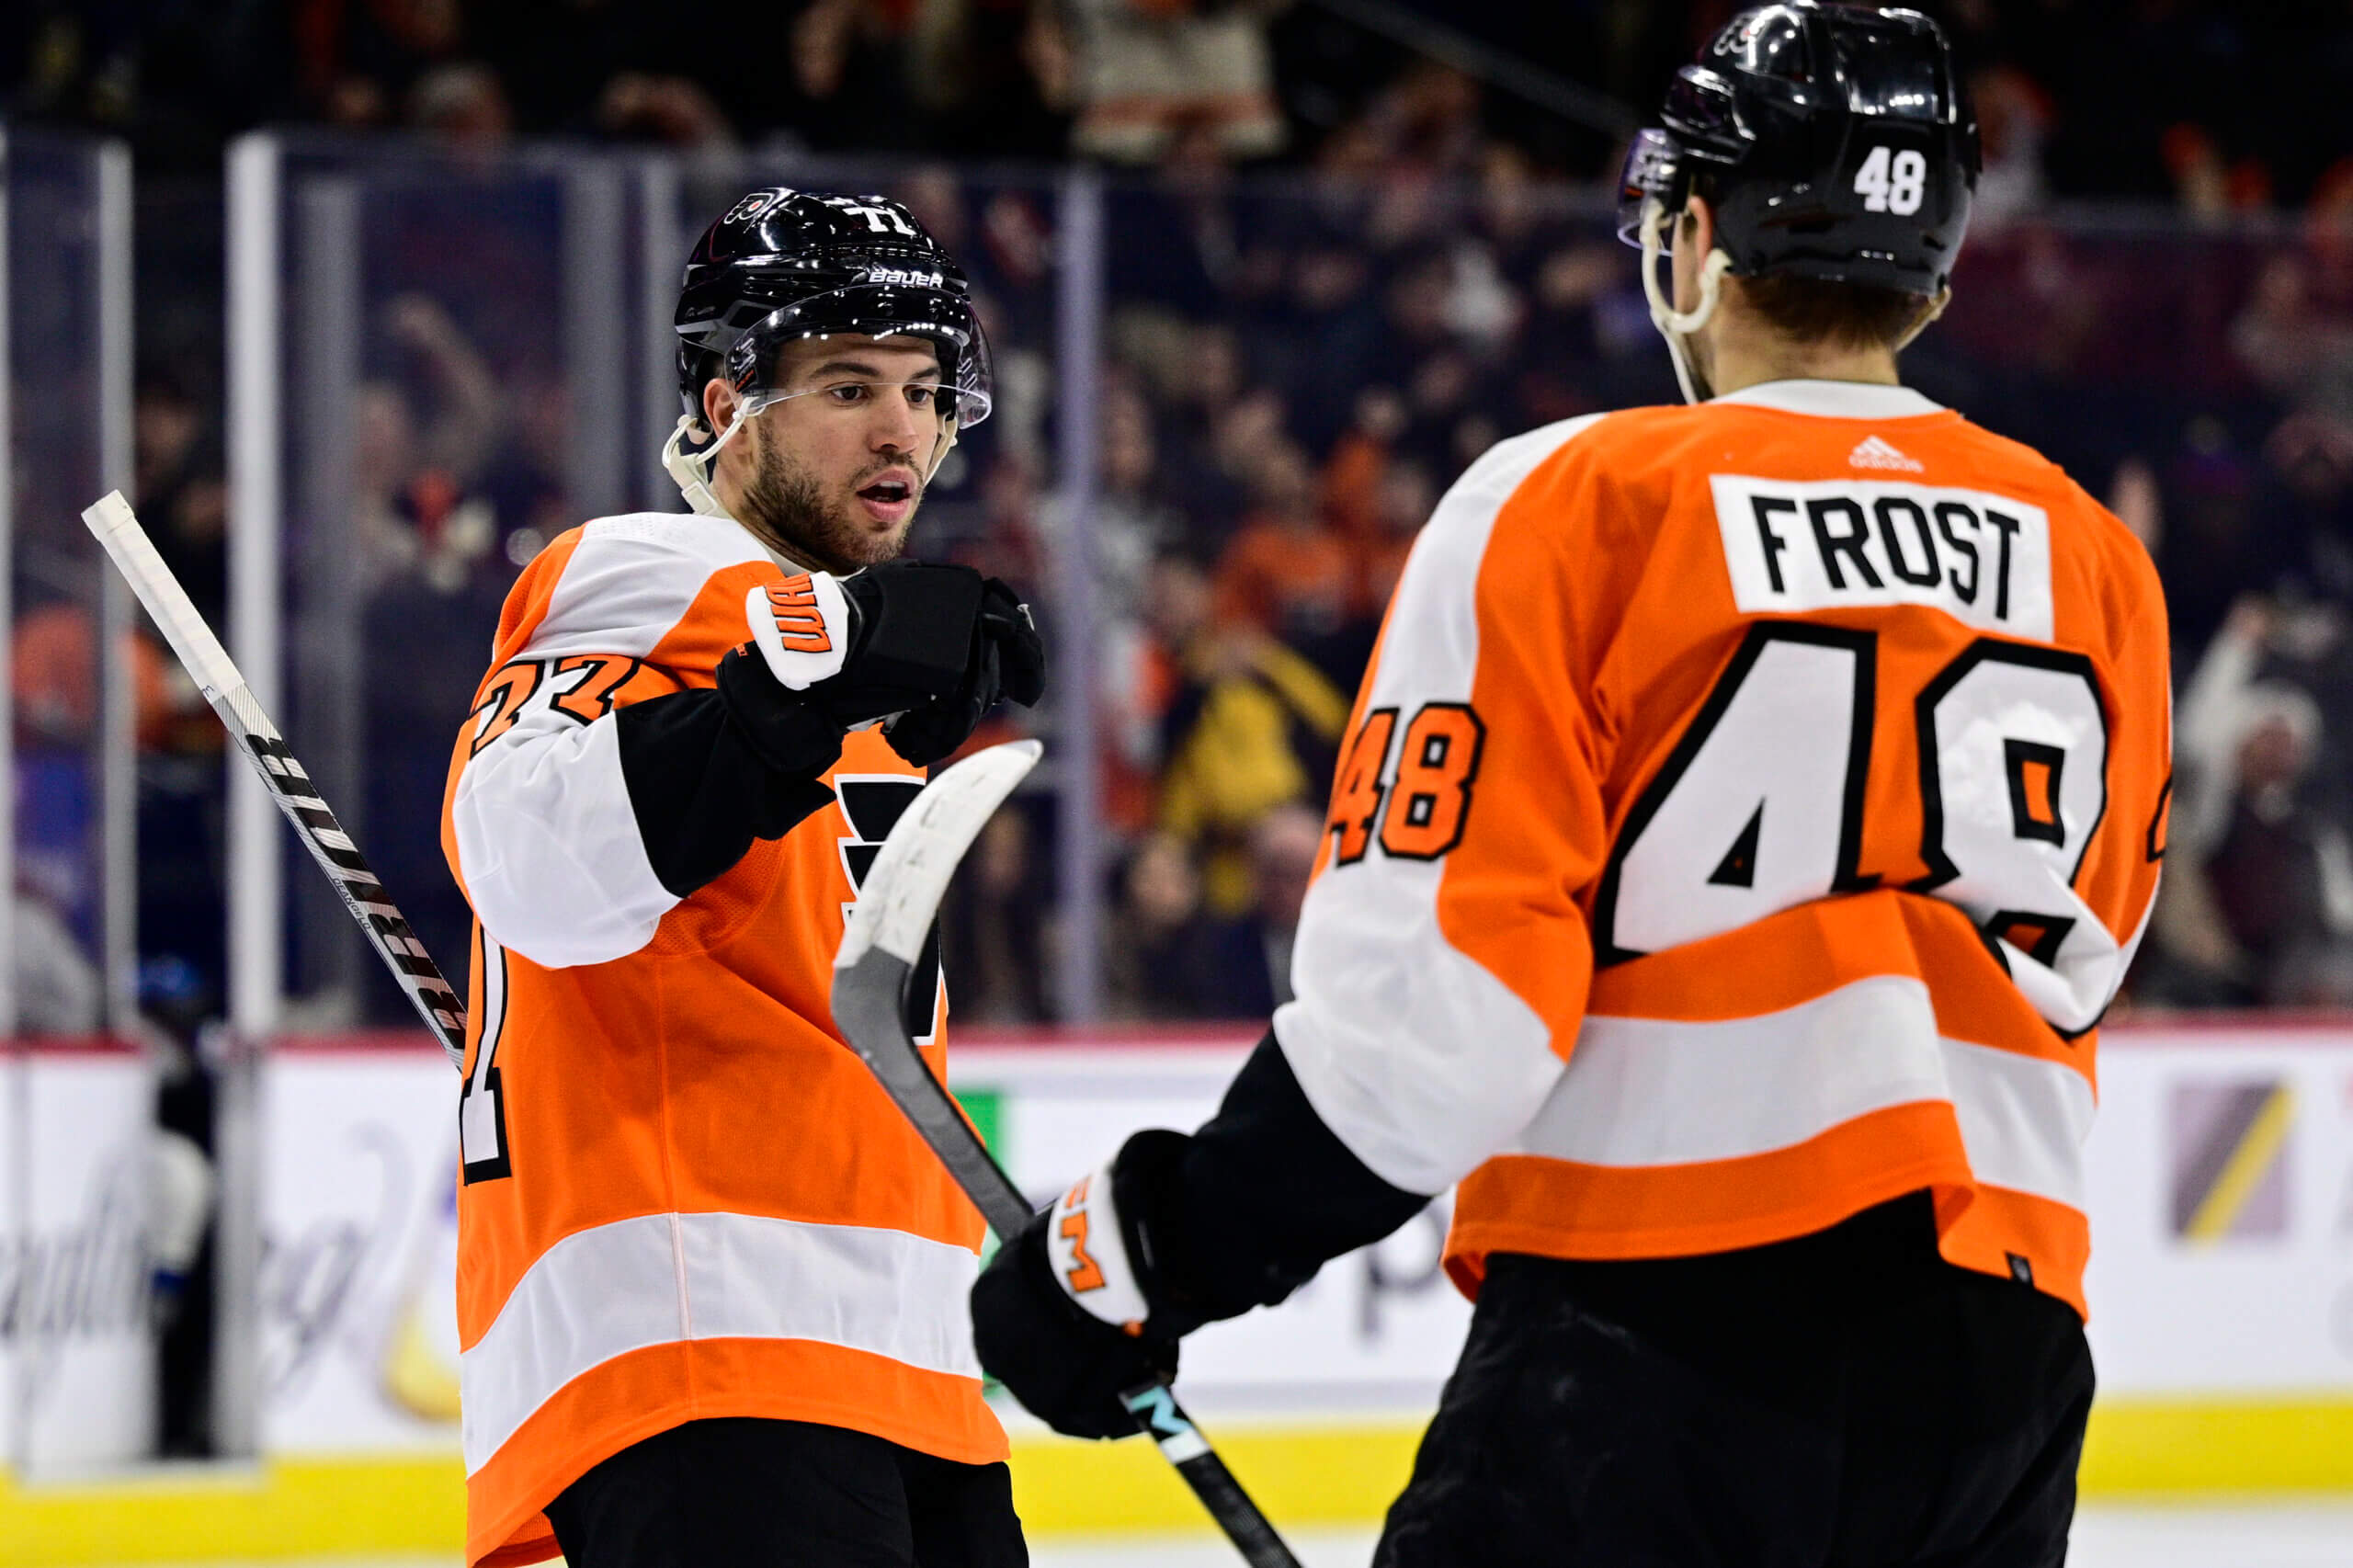 Flyers defenceman Tony DeAngelo clears waivers, becomes free agent